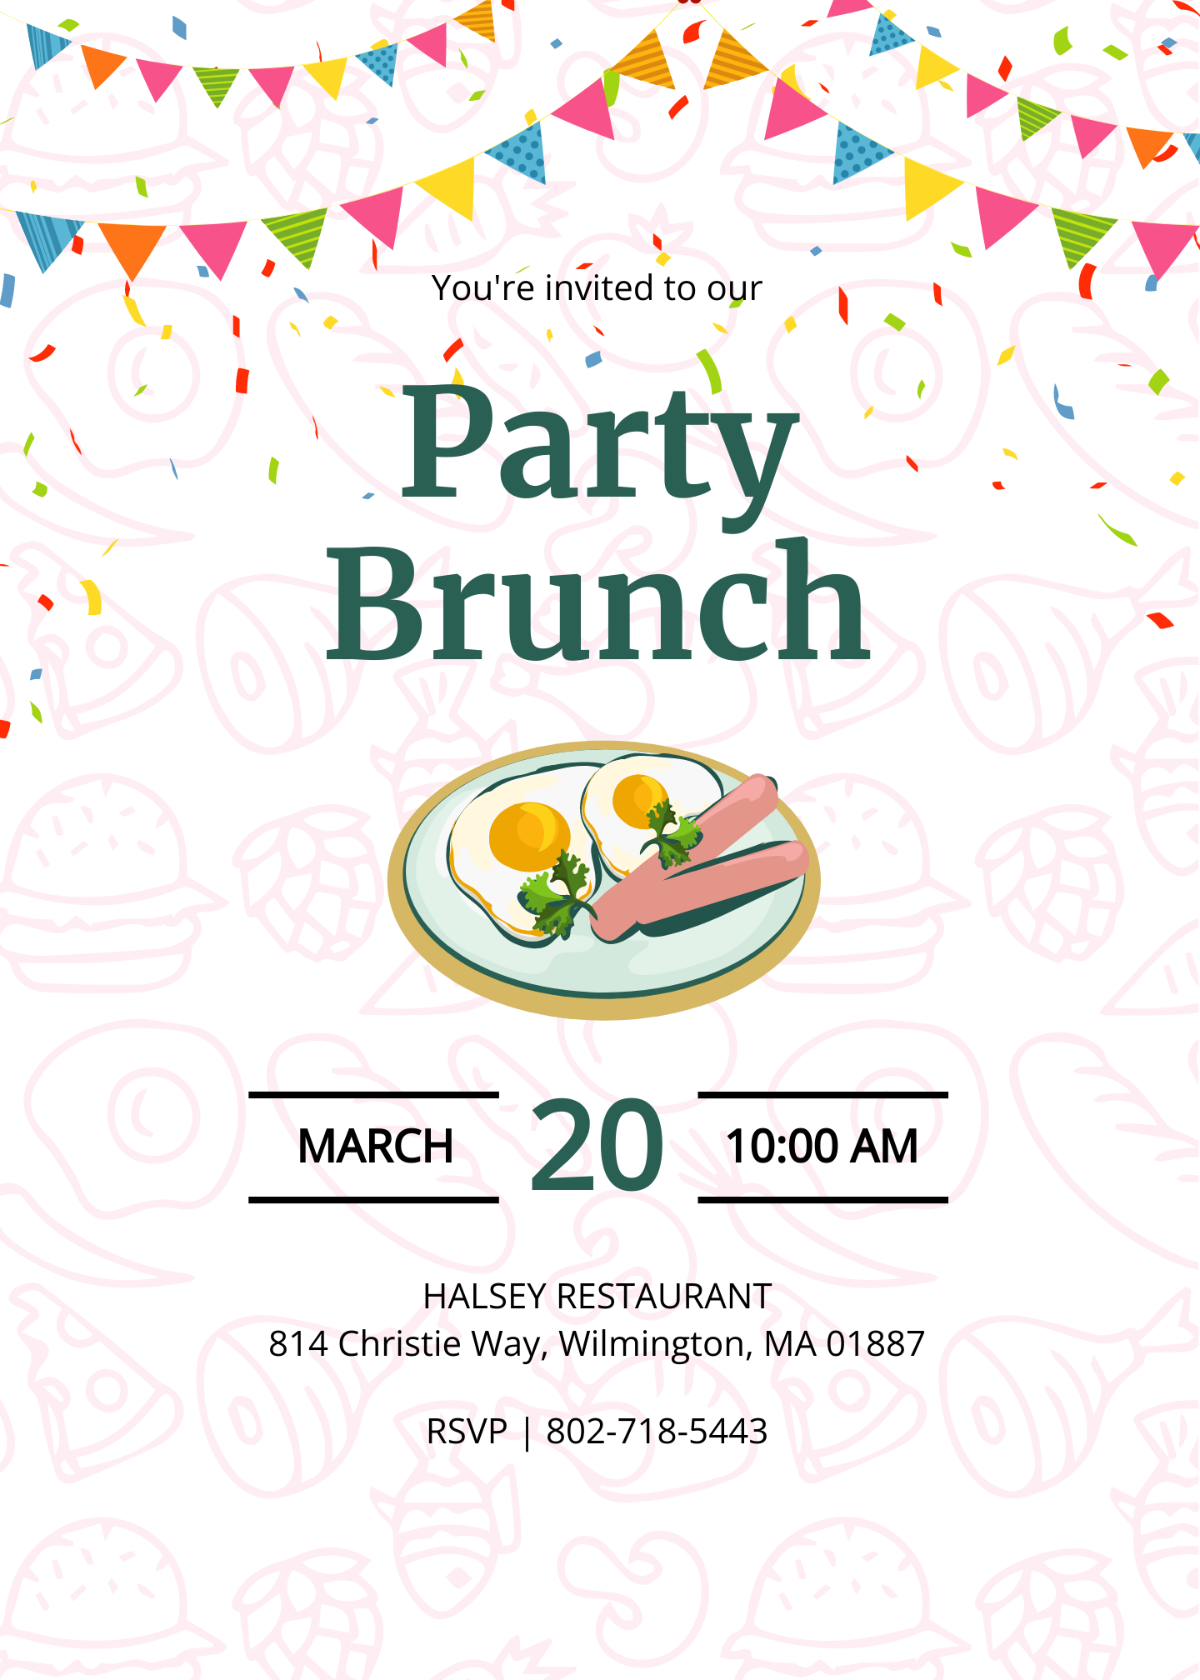 Party Brunch Invitation Template